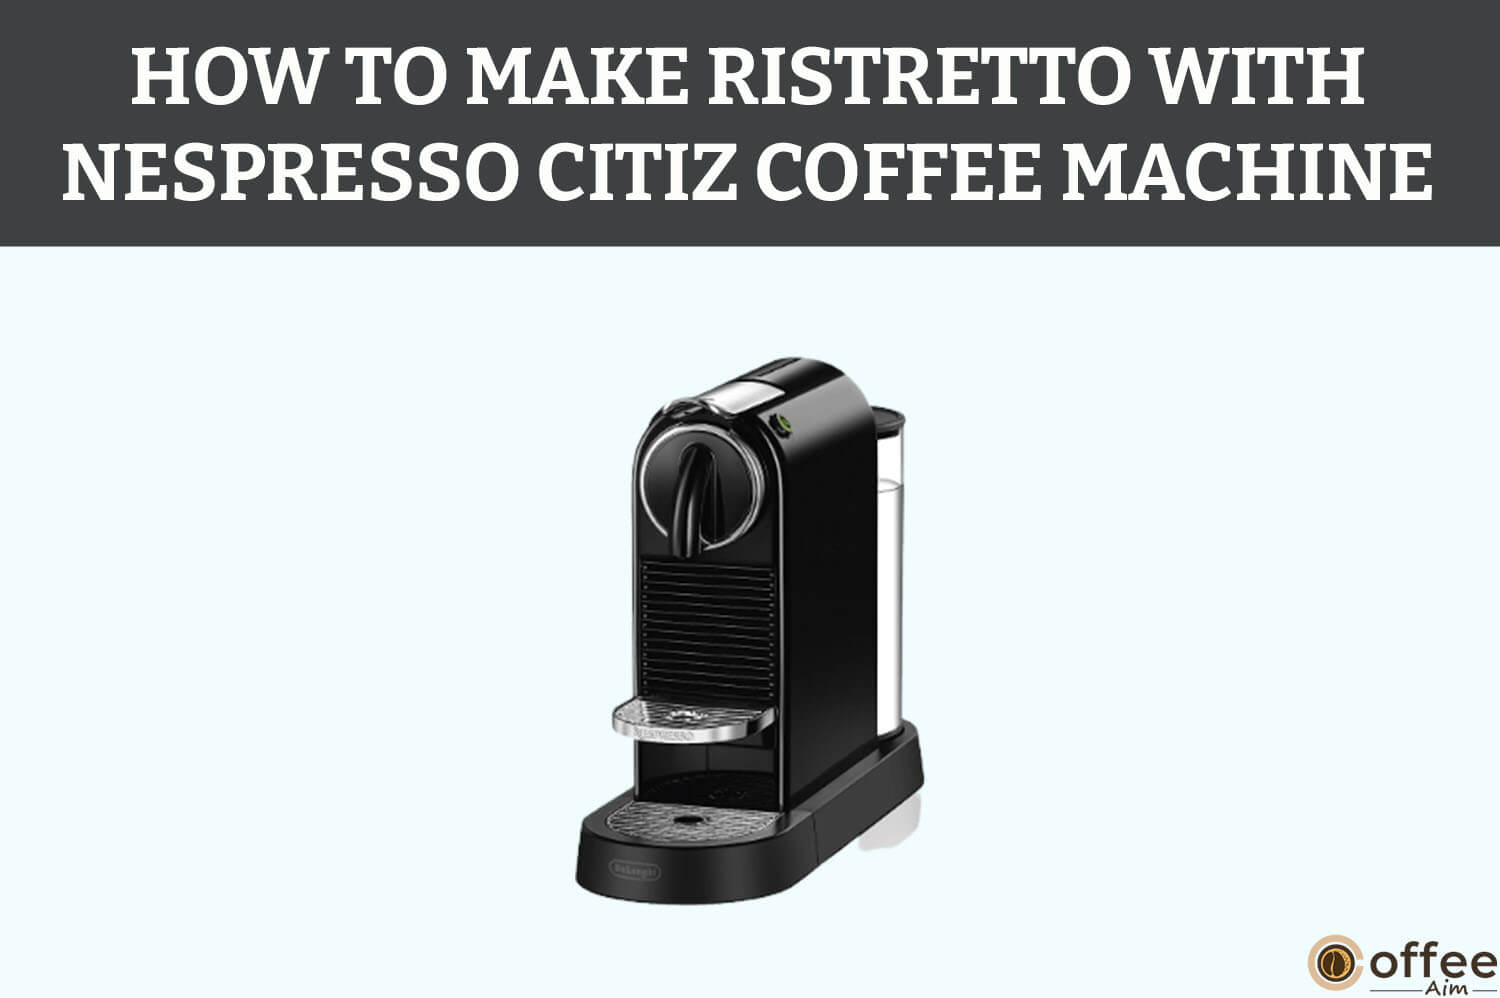 Featured image for the article "How To Make Ristretto With Nespresso CitiZ Coffee Machine"